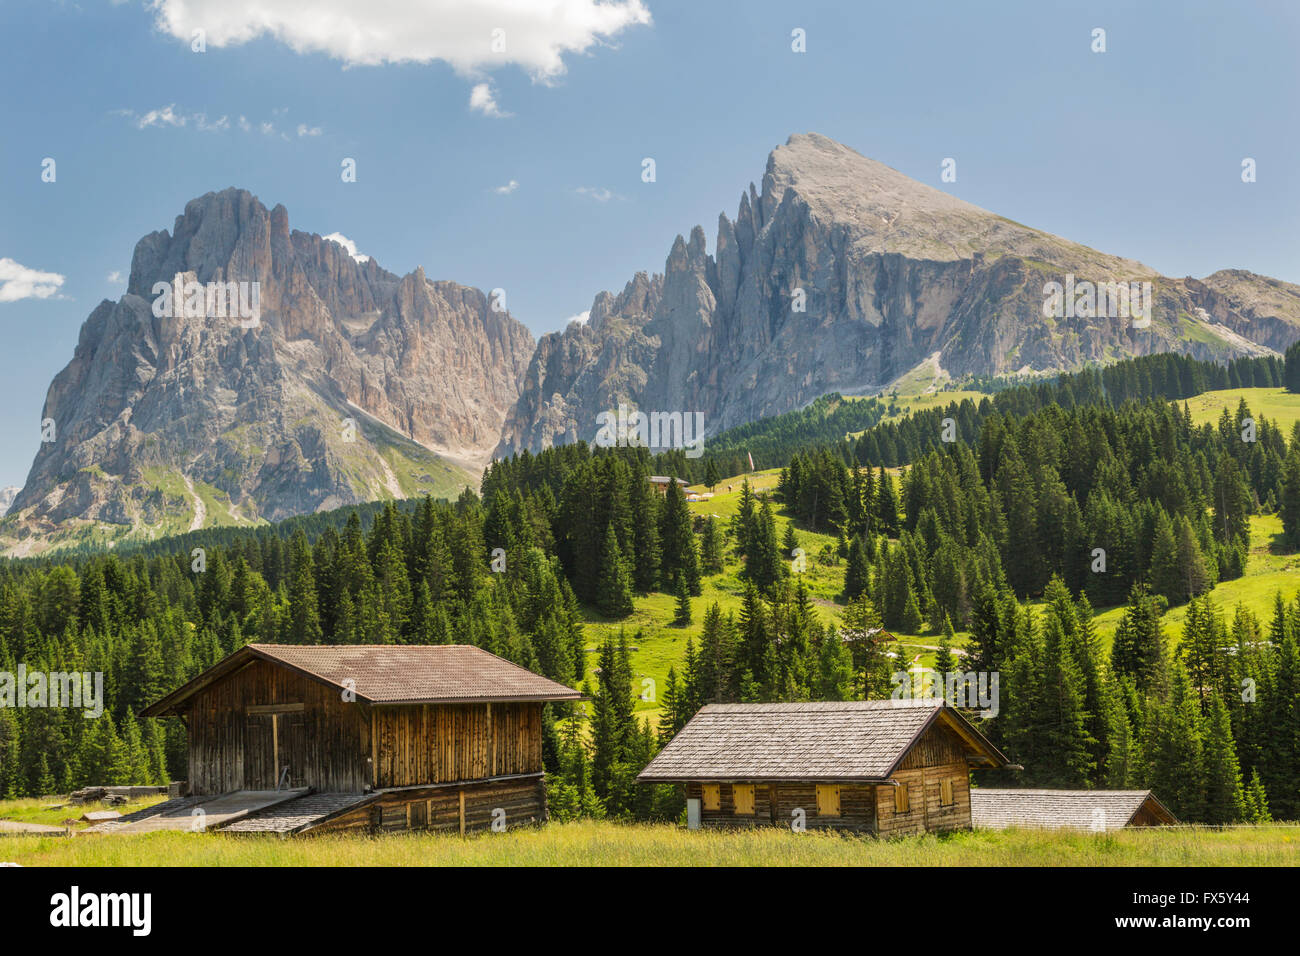 Two barns with two high mountains in background and trees and forest, Selva, val Gardena, Dolomites, Italy Stock Photo